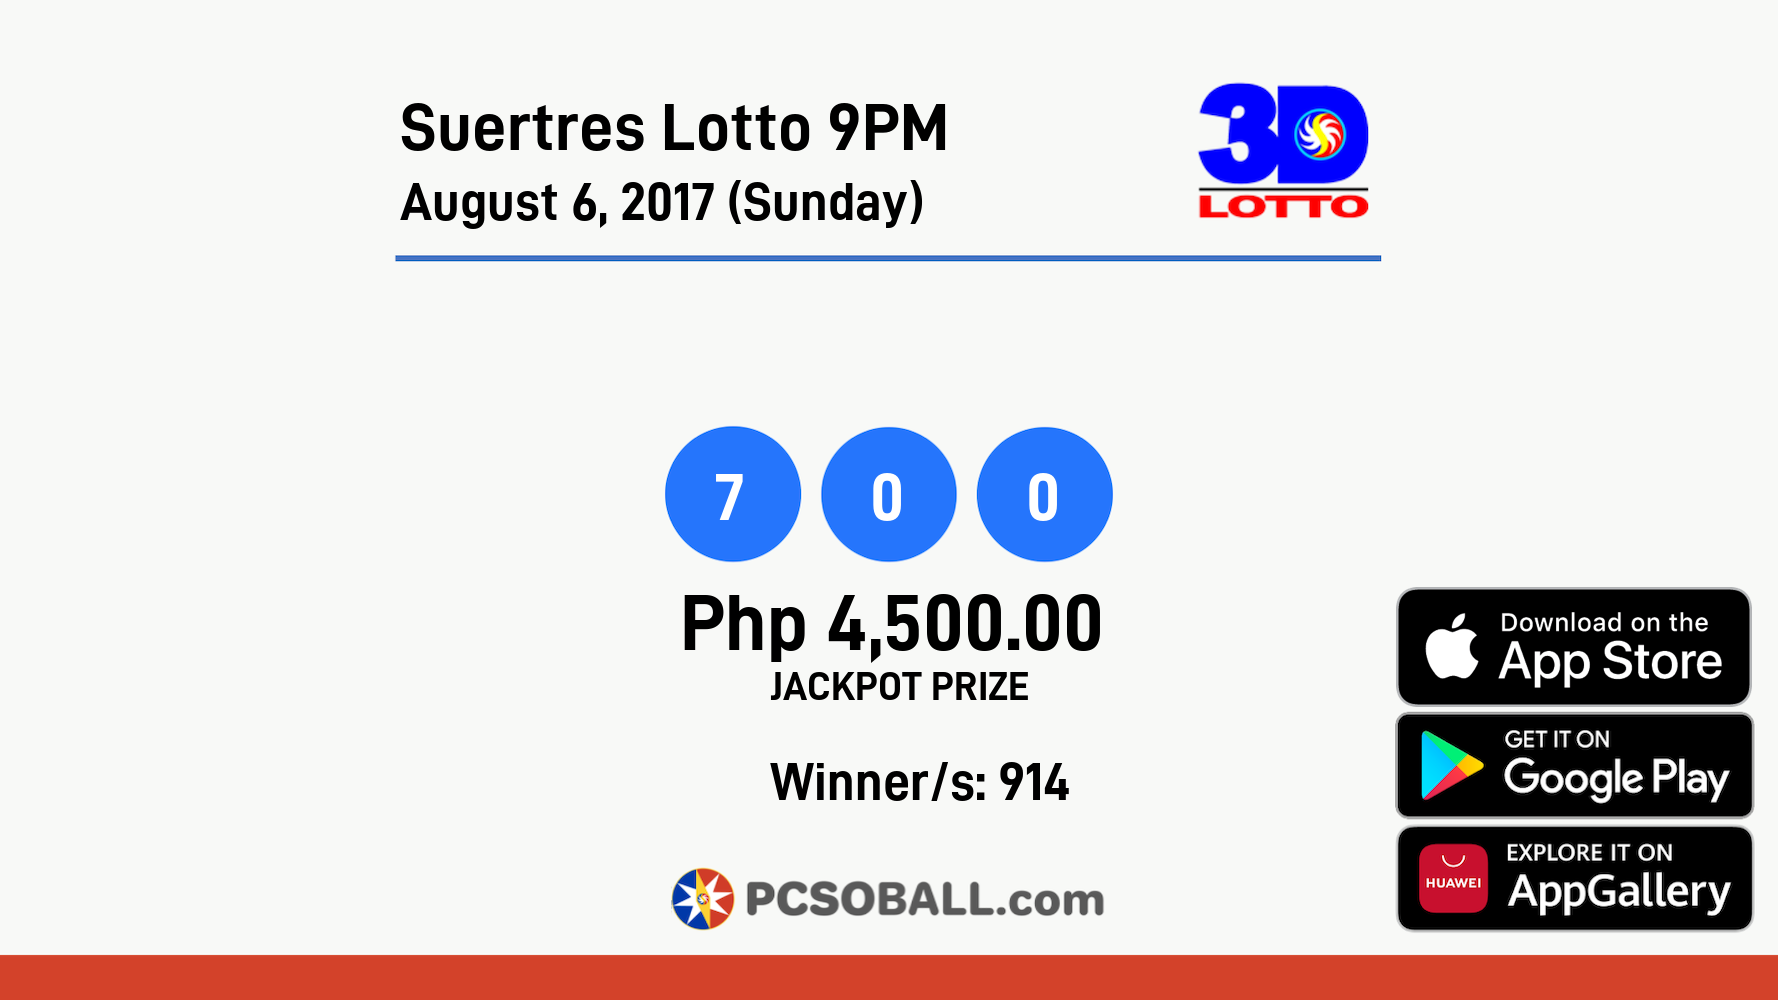 Suertres Lotto 9PM August 6, 2017 (Sunday) Result